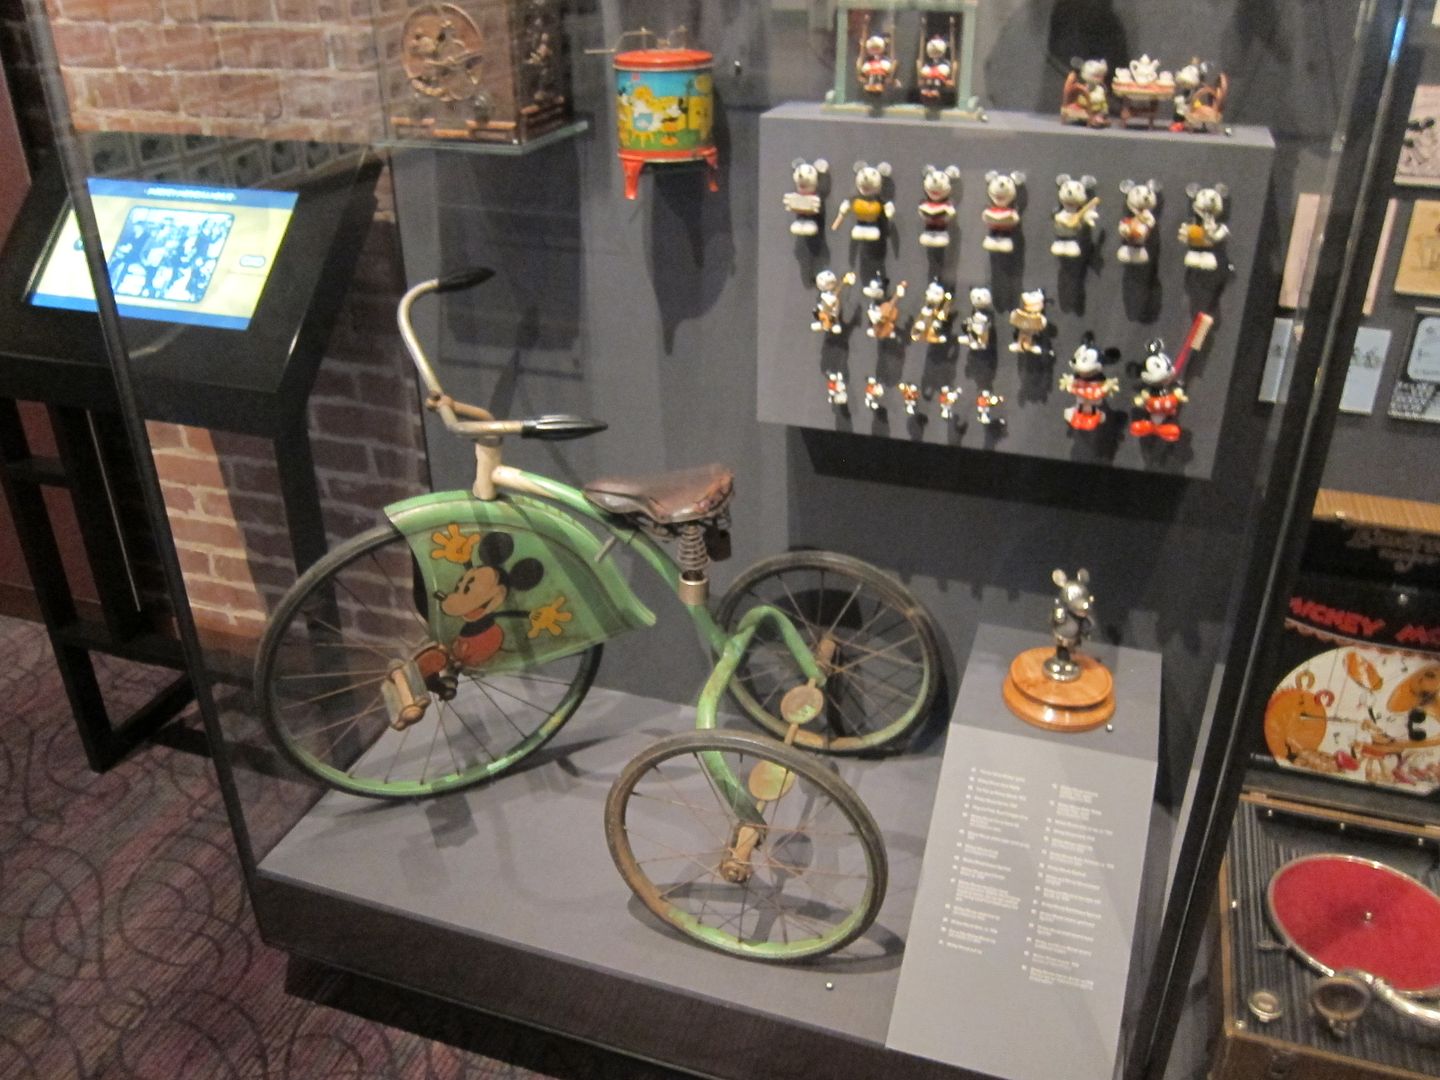 Early Mickey Mouse Merchandise | Walt Disney Family Museum